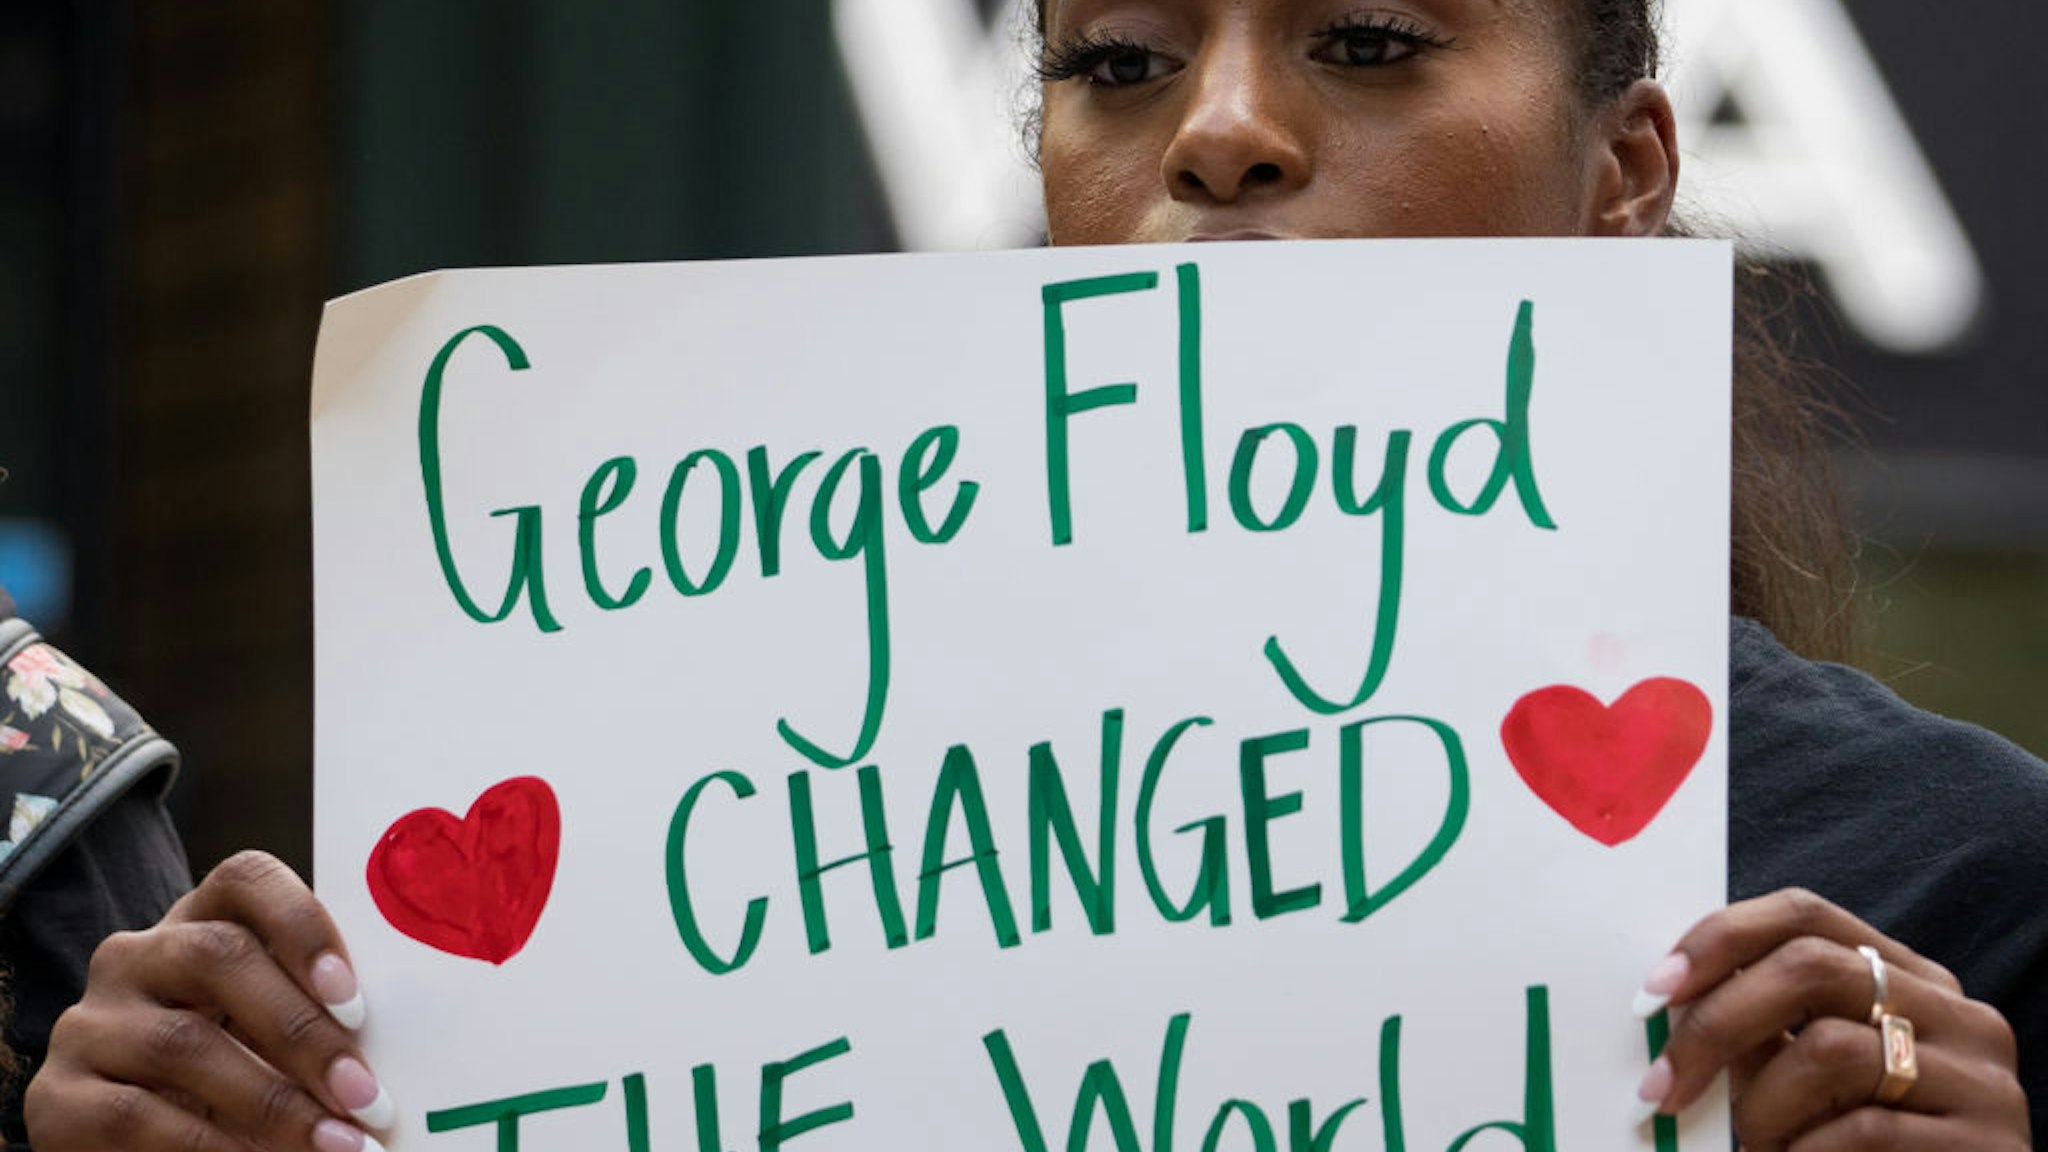 ATLANTA, GA - MAY 25: People gather to march and memorialize the life of George Floyd on the anniversary of his death on May 25, 2021 in Atlanta, Georgia. Floyd's death at the hands of Minneapolis police officer Derek Chauvin sparked protests and movements around the world. (Photo by Megan Varner/Getty Images)